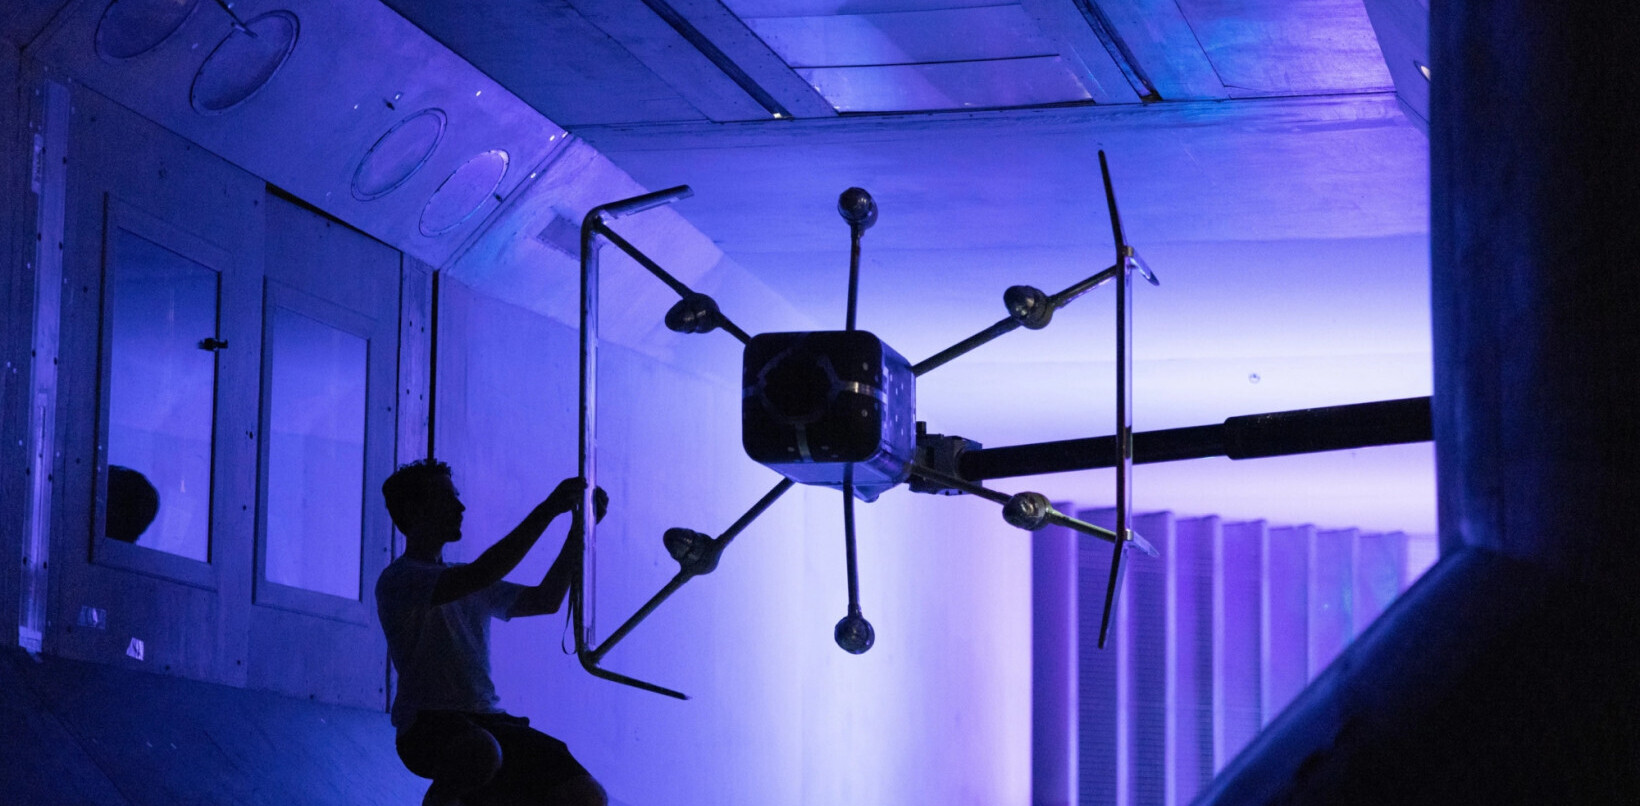 Amazon shows off latest delivery drone, plans liftoff in UK and Italy next year